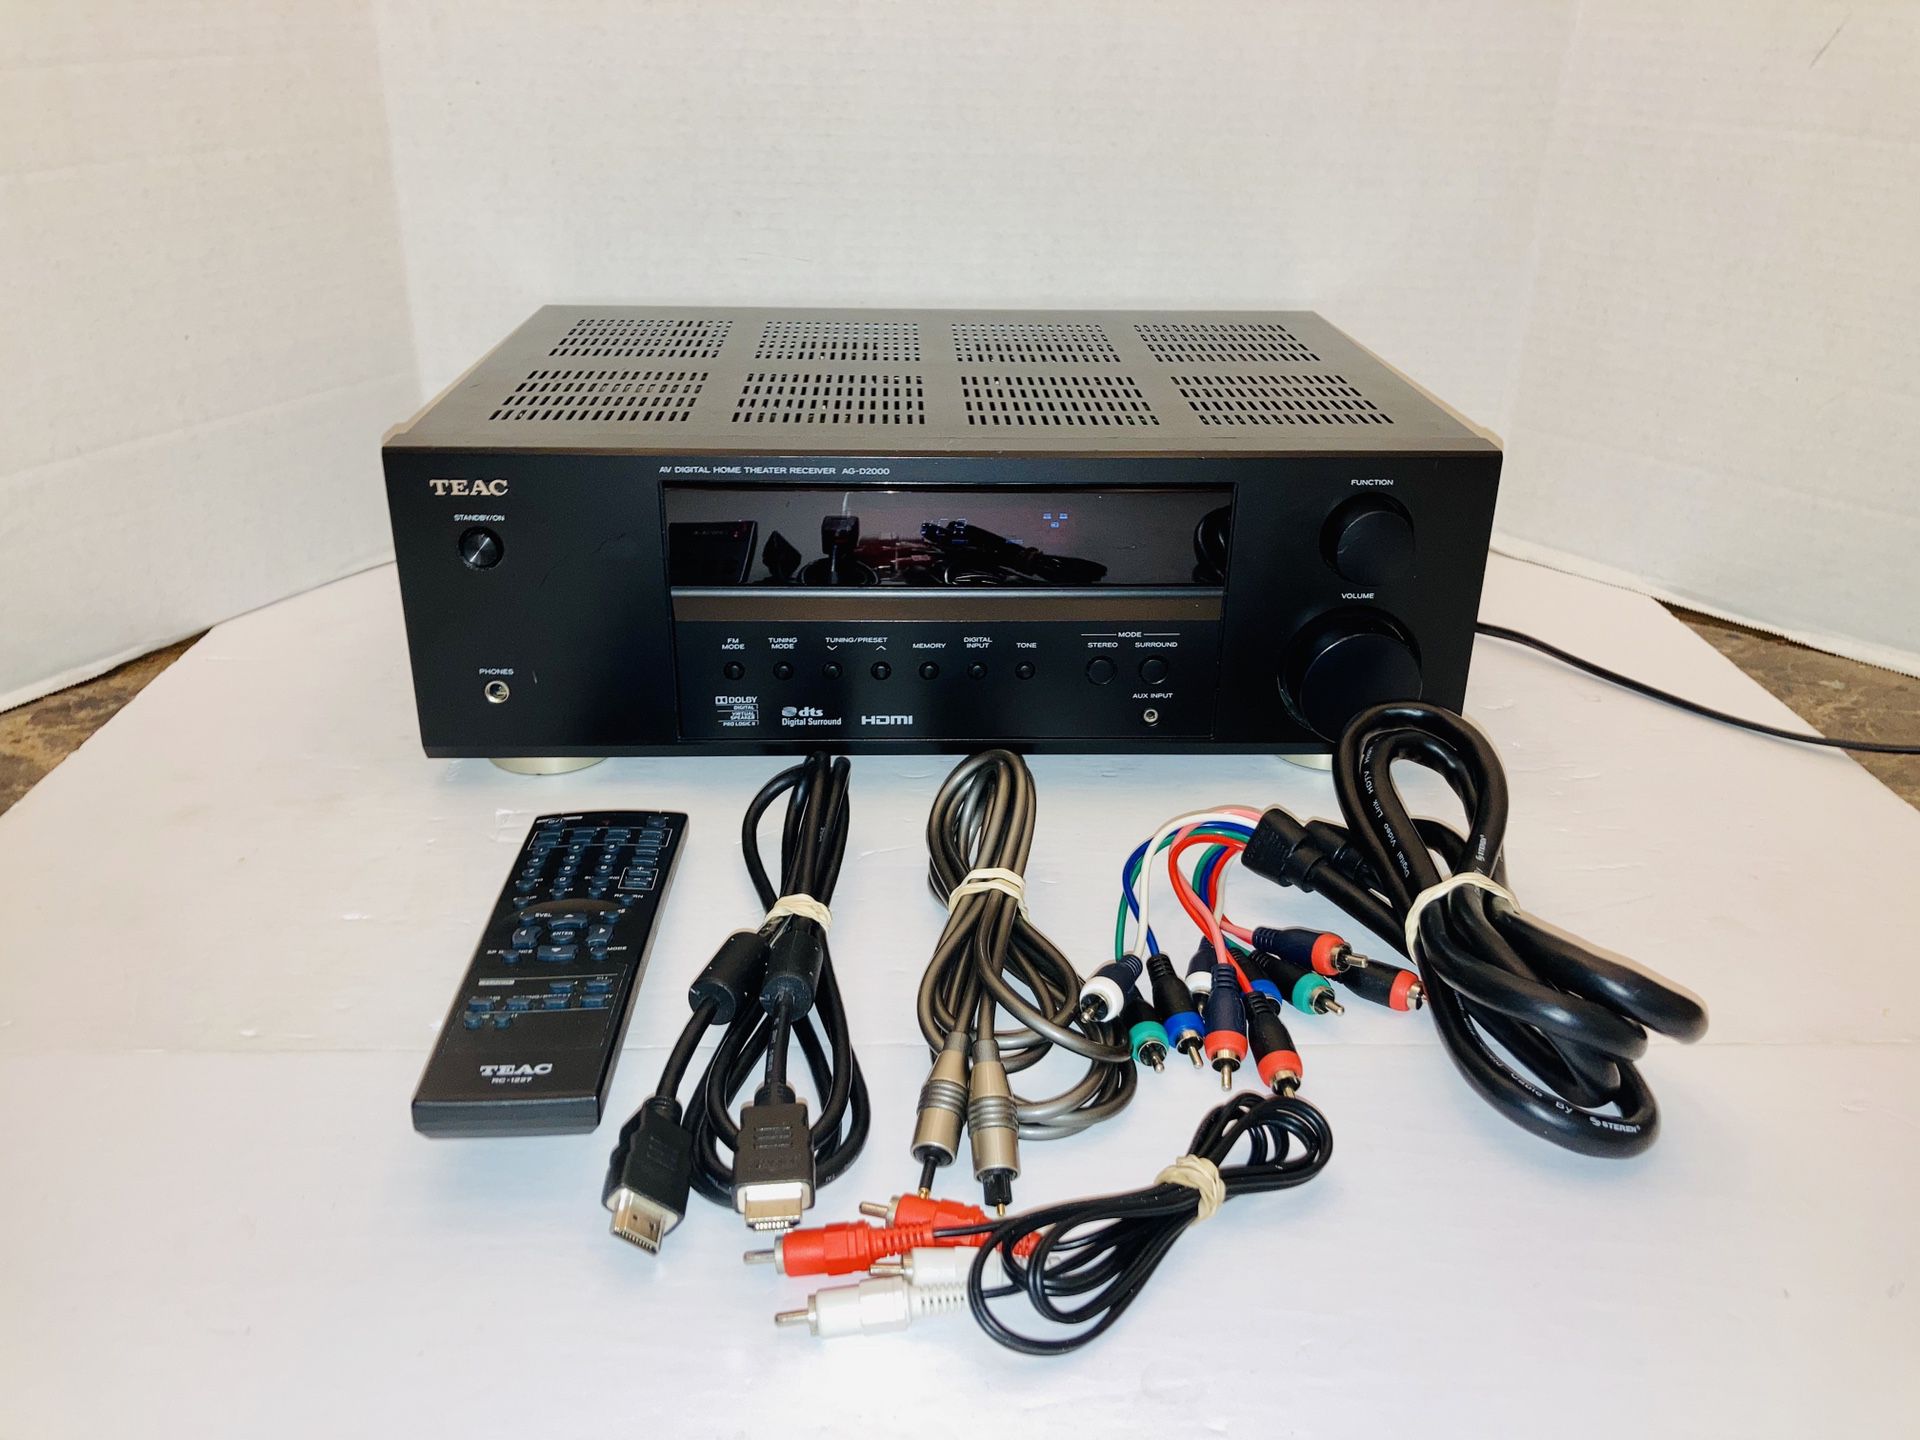 RARE TEAC Japanese Model Dual Voltage AG-D2000 Powerful HDMI 5.1-Channel Home Theater Surround Sound Receiver